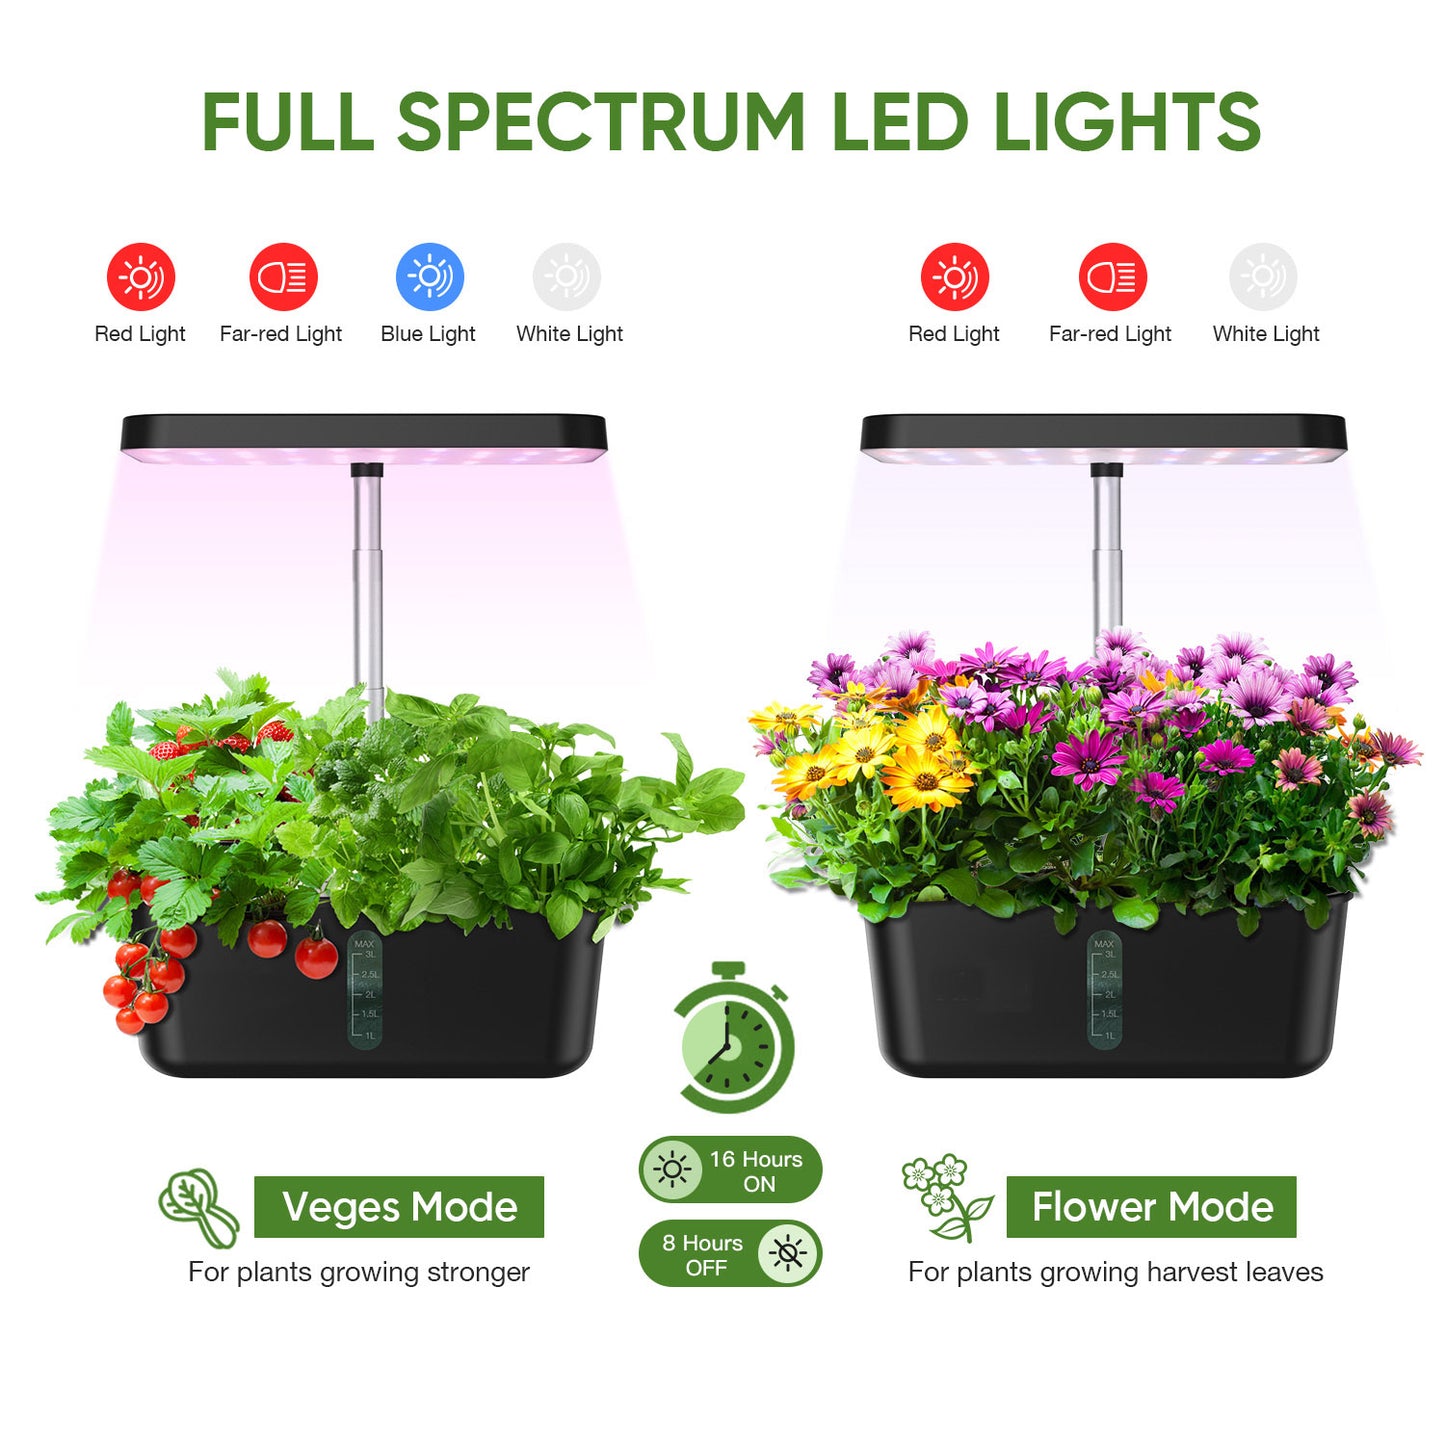 Hydroponics Growing System:8Pods Herb Garden Planter Indoor Kit with Automatic Timer, Germination Kit with LED Grow Light